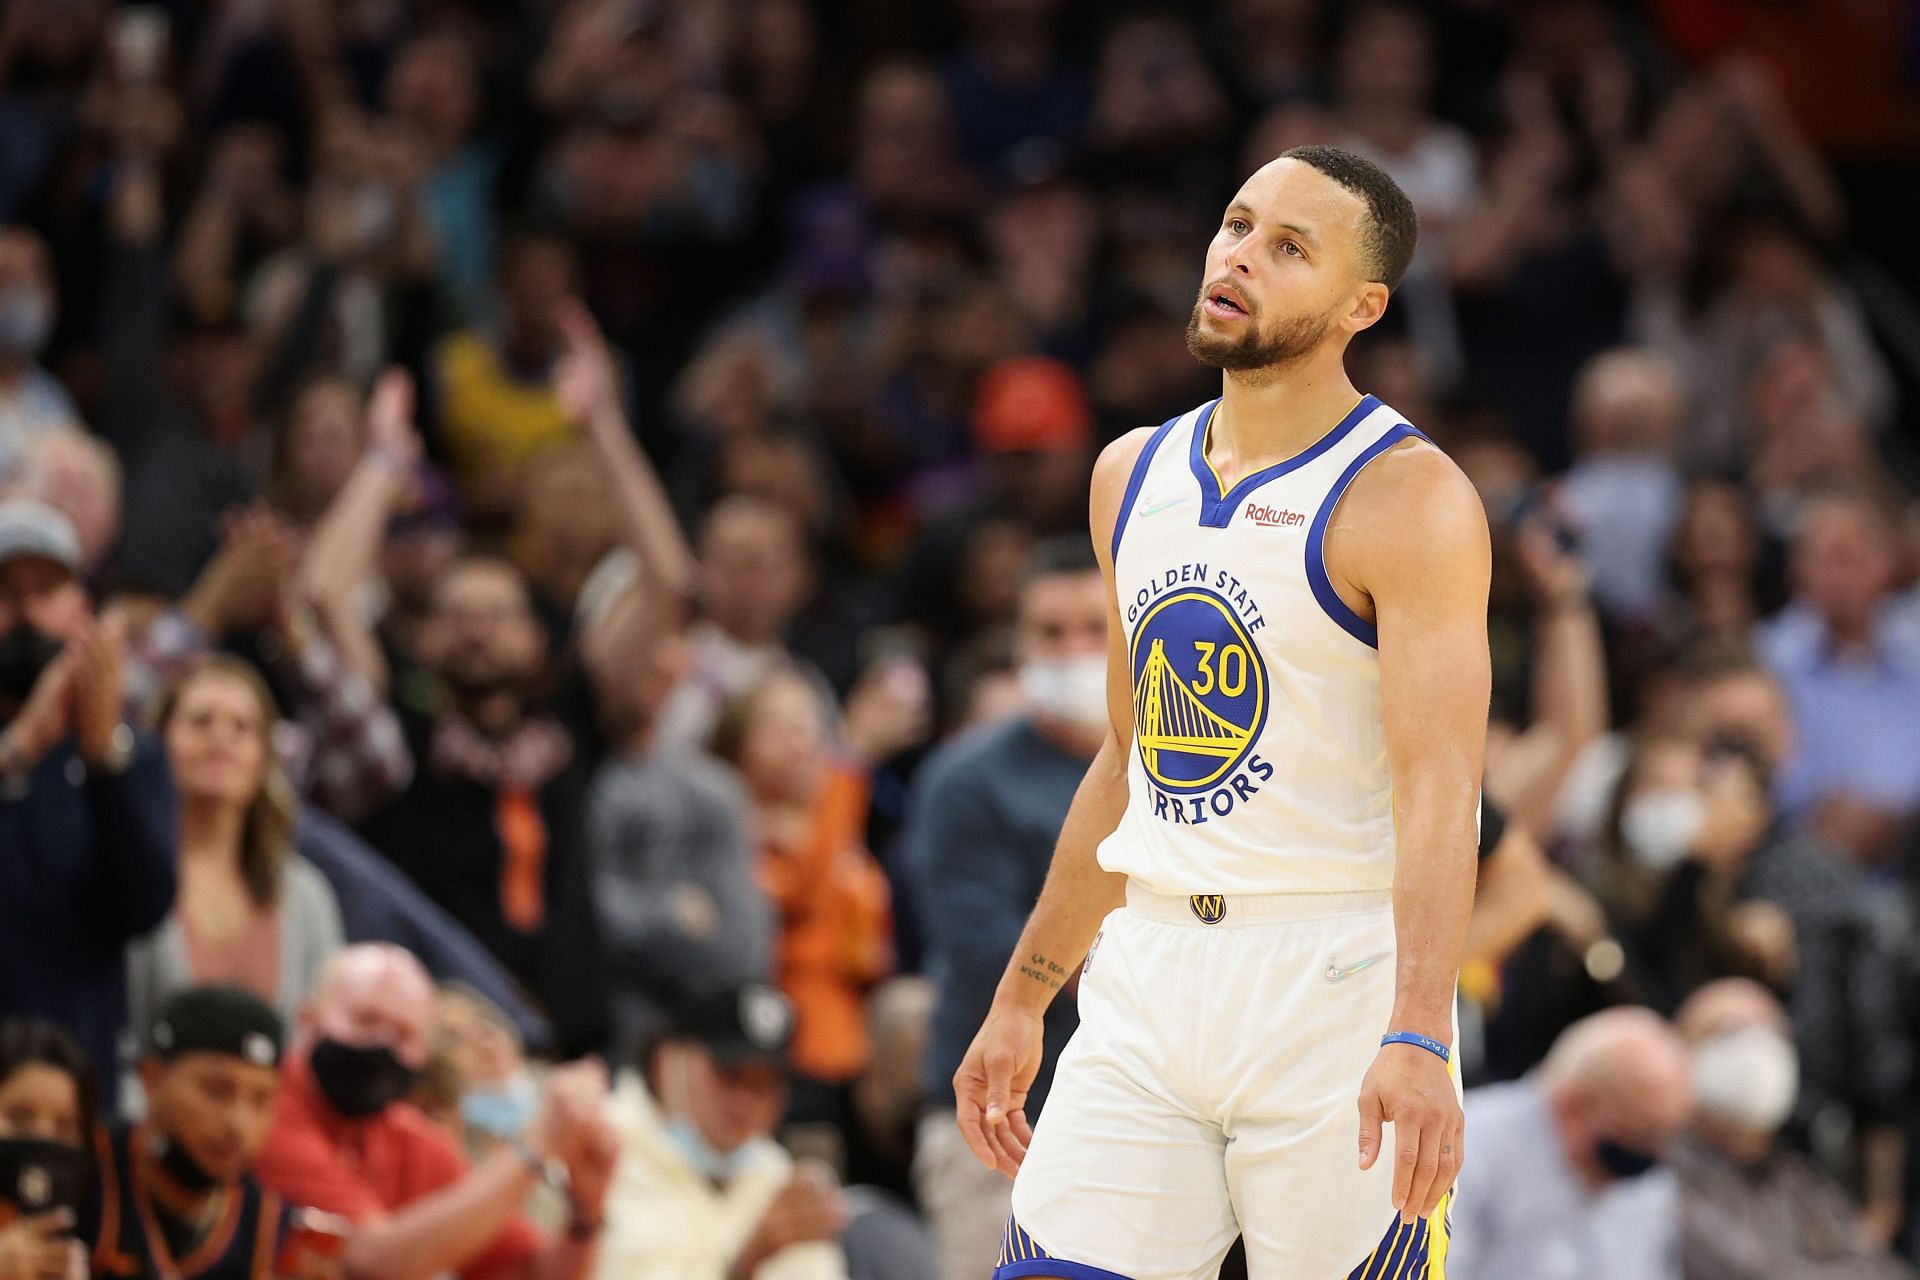 Steph Curry #30 of the Golden State Warriors walks off the court following the NBA game against the Phoenix Suns at Footprint Center on November 30, 2021 in Phoenix, Arizona.